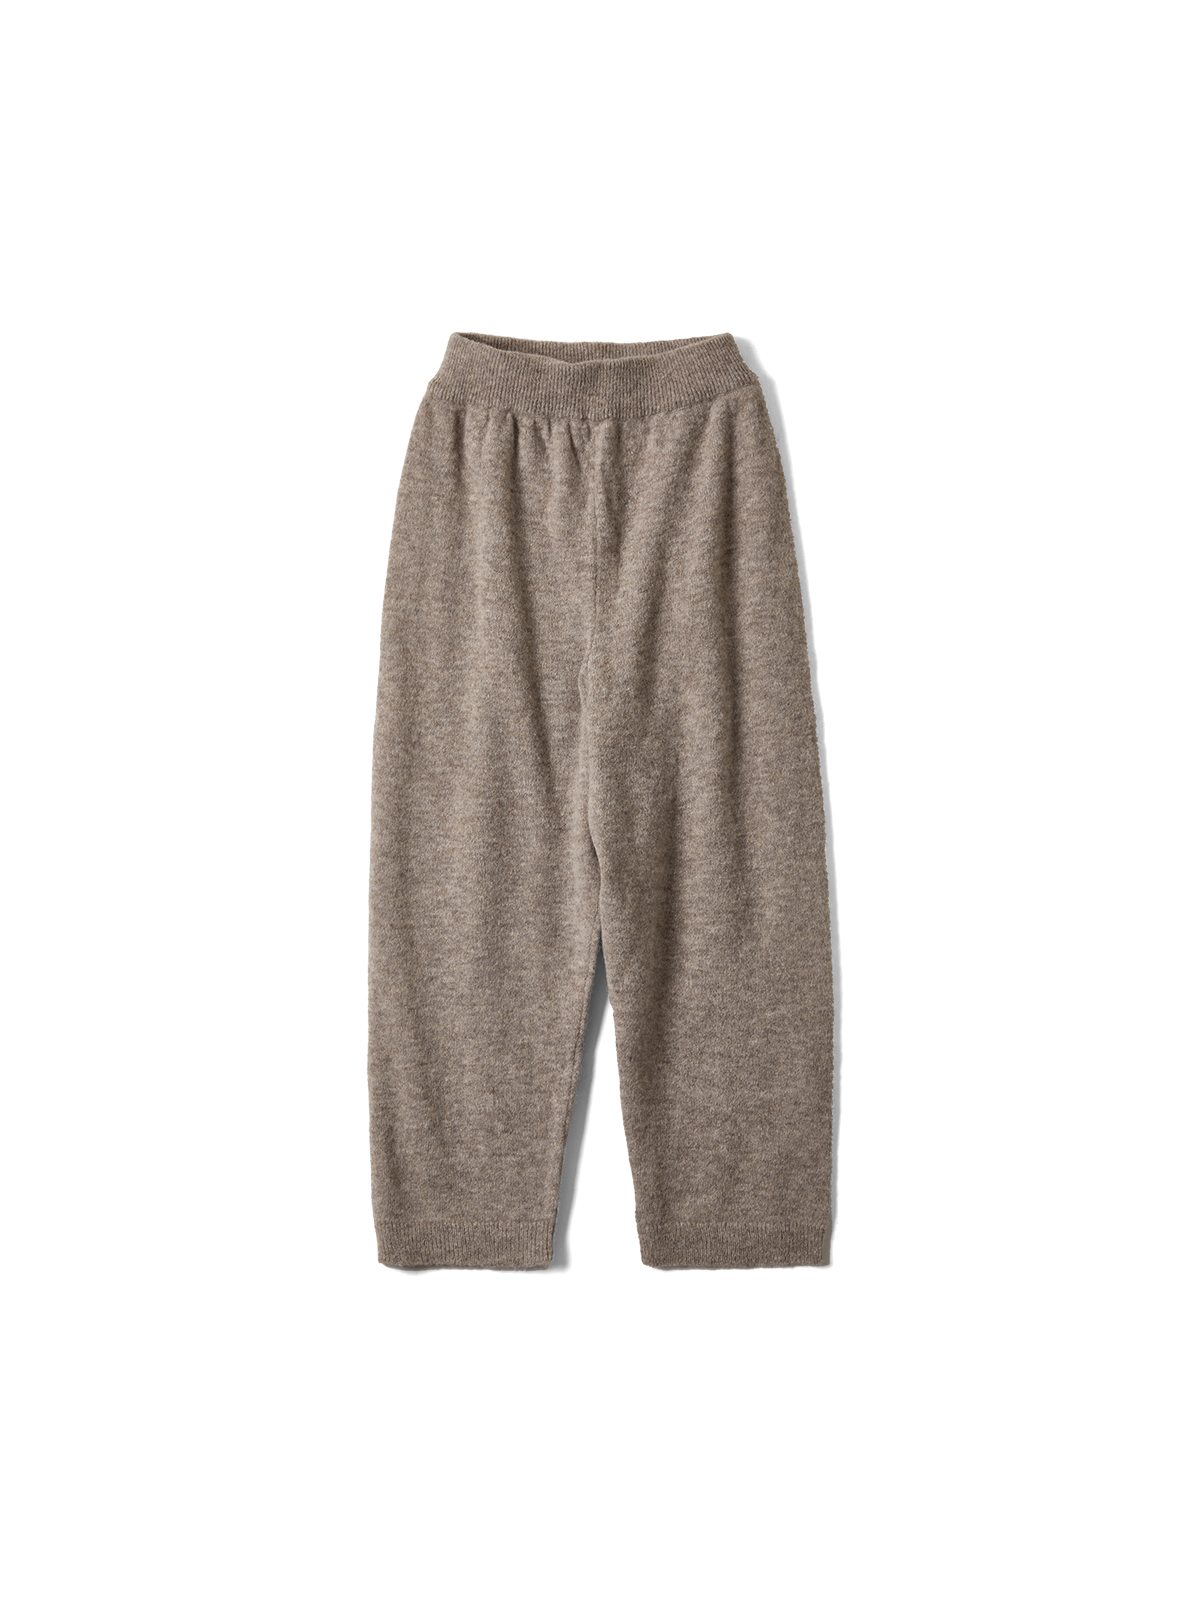 BABY ALPACA KNIT PANTS (TAUPE)